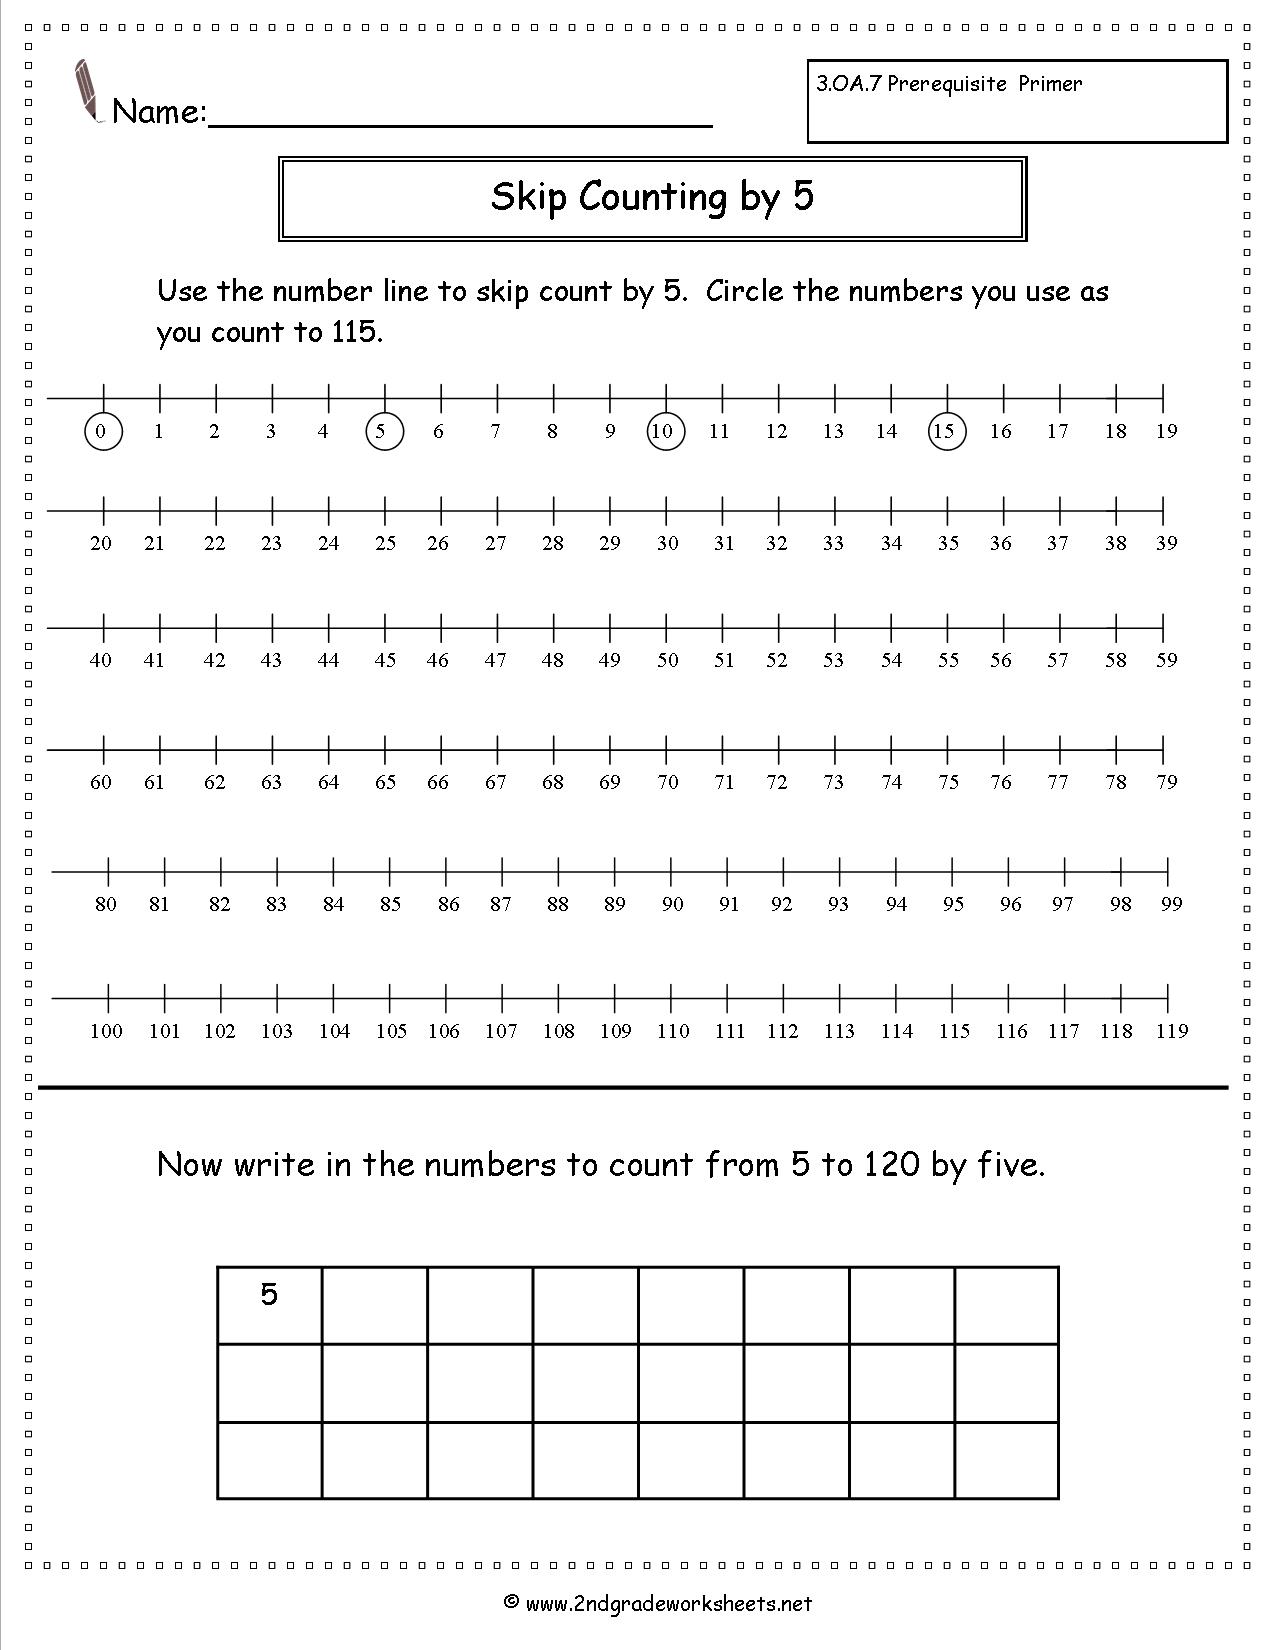 2nd Grade Skip Counting by 5 Worksheets Image